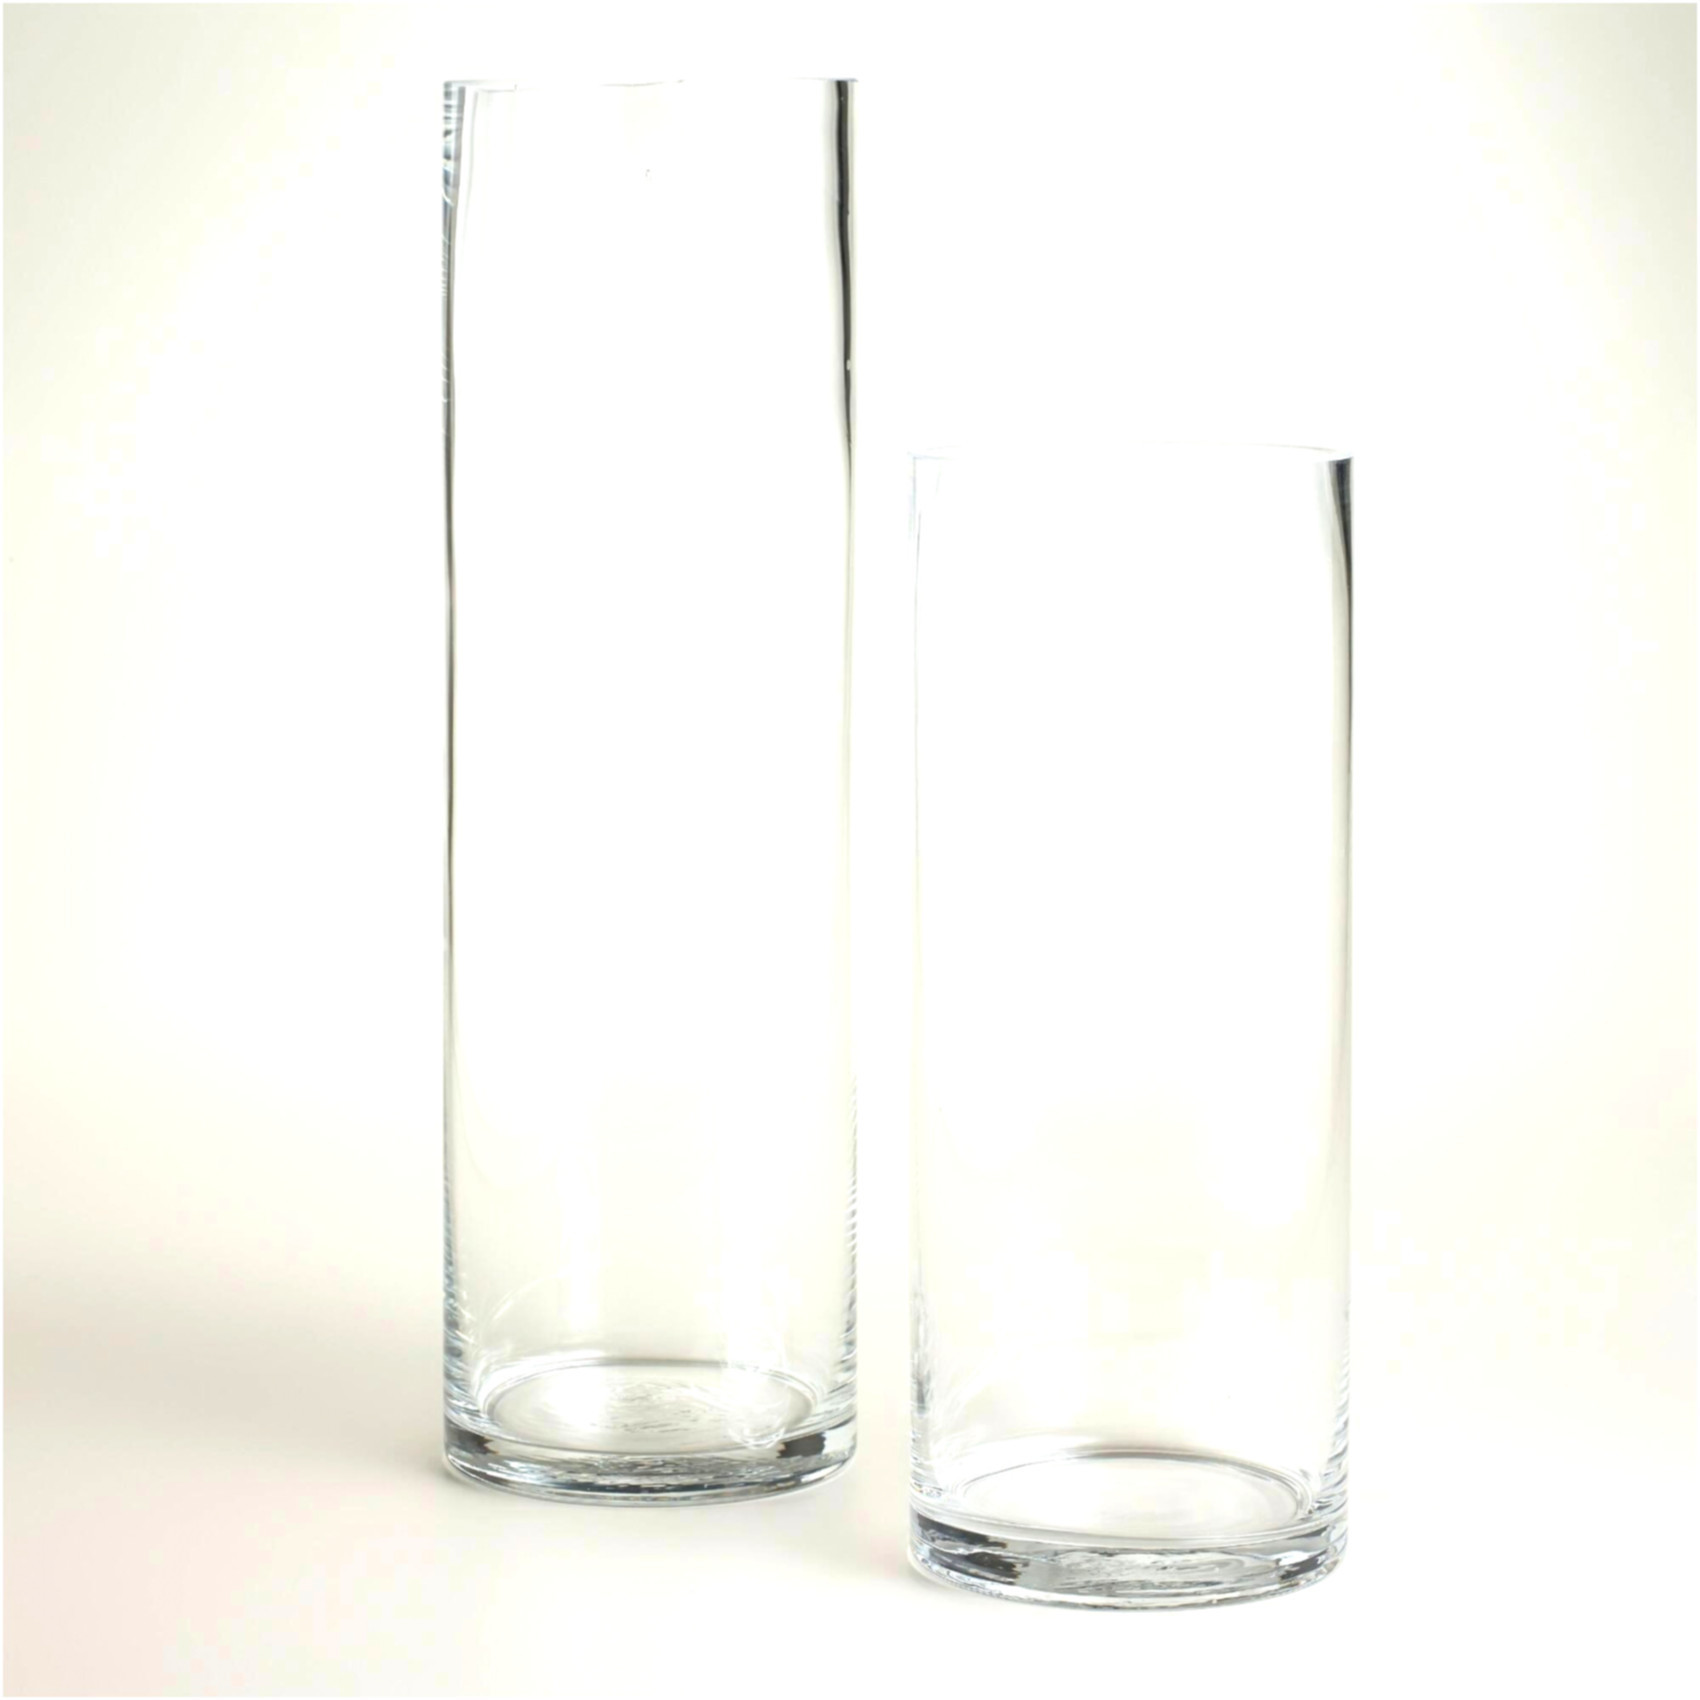 10 Amazing Tall Cylinder Vases Set Of 3 2023 free download tall cylinder vases set of 3 of why you should not go to glass vases wholesale glass vases with regard to crystal glass vases wholesale inspirational 30 elegant vases with